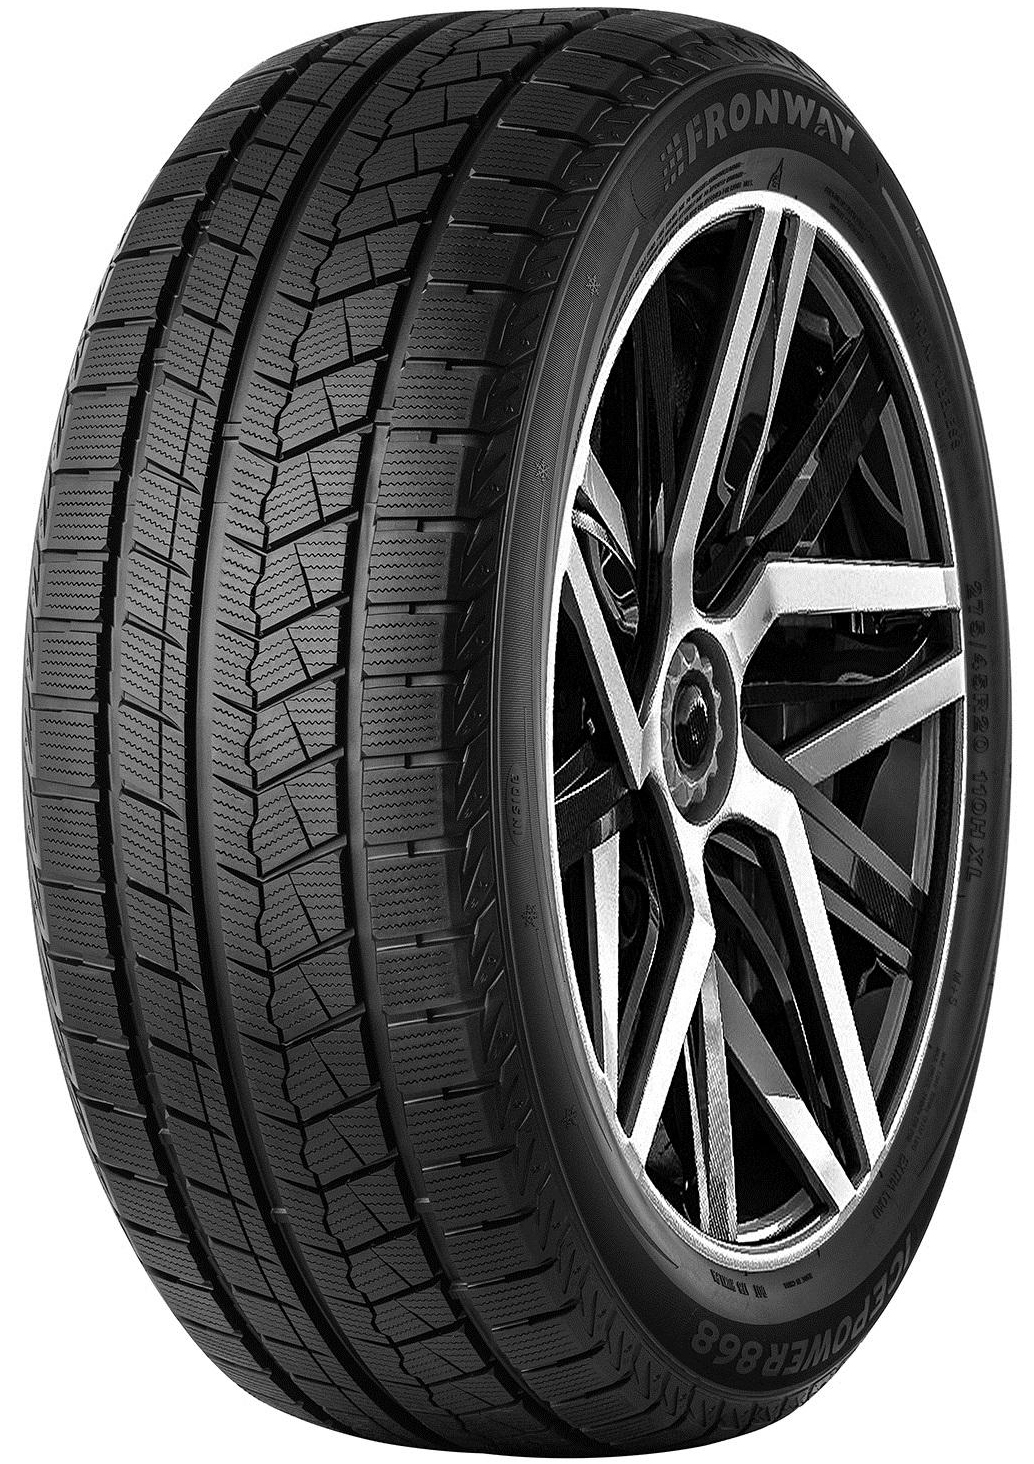    Fronway Icepower 868 205/50 R17 